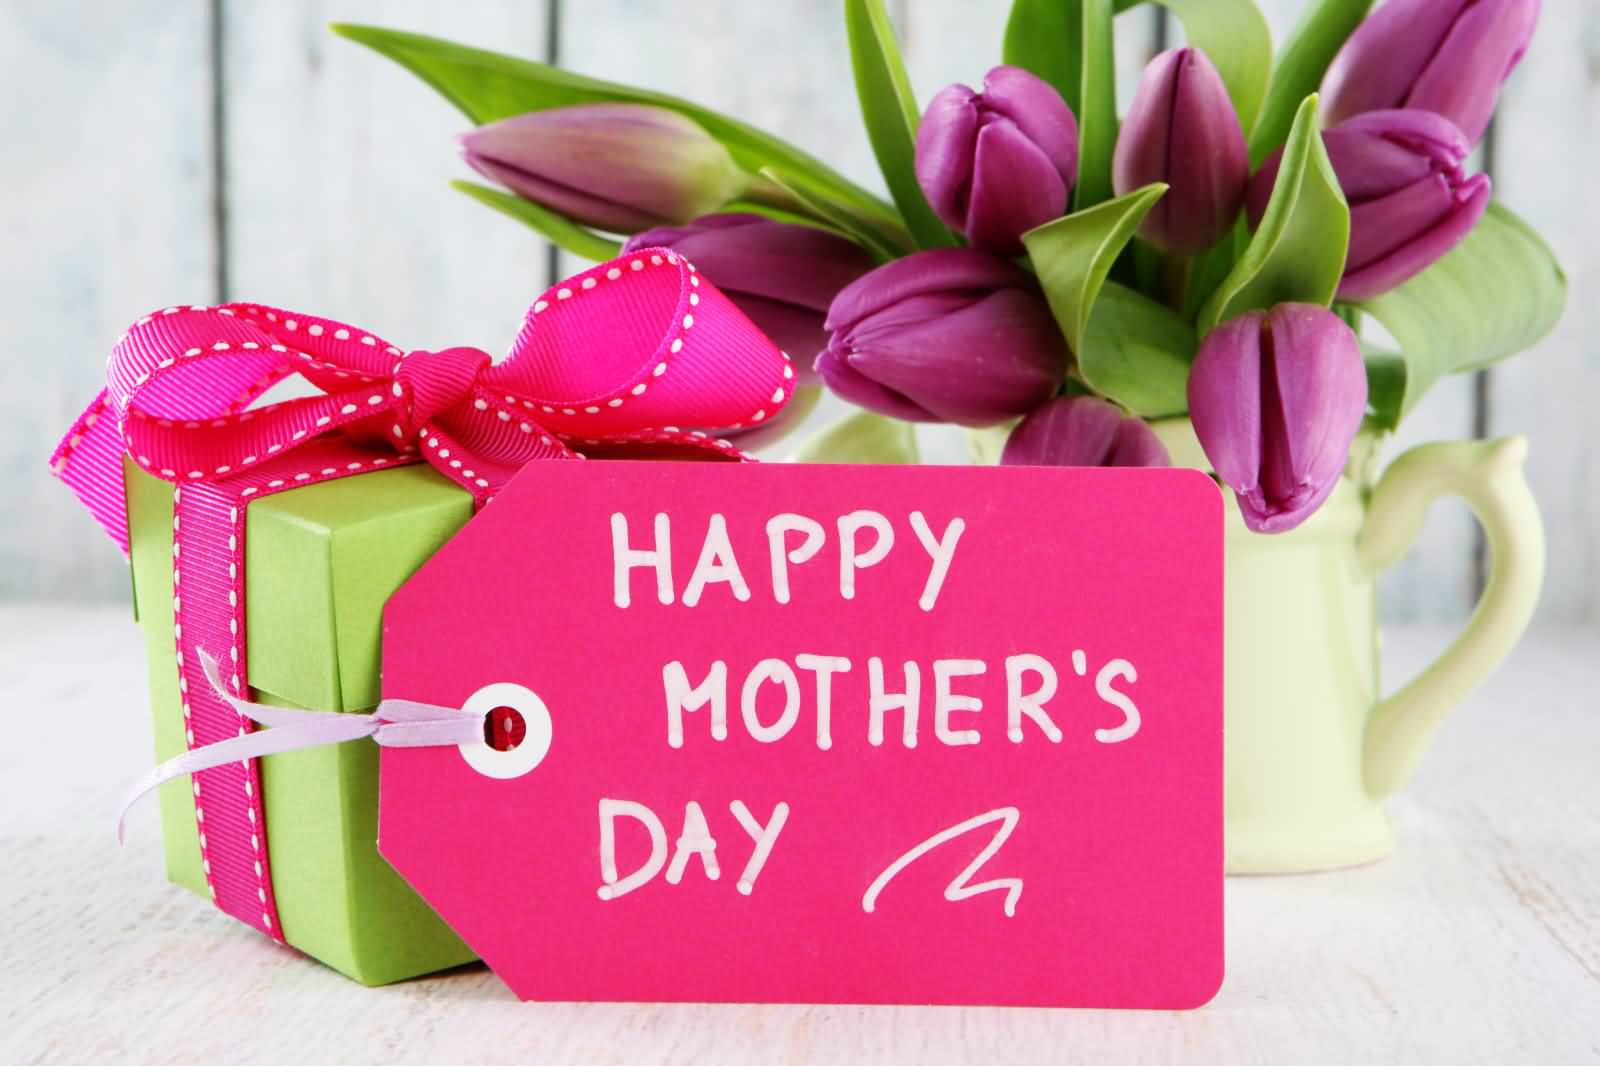 Happy Mother's Day Card With Gift Box